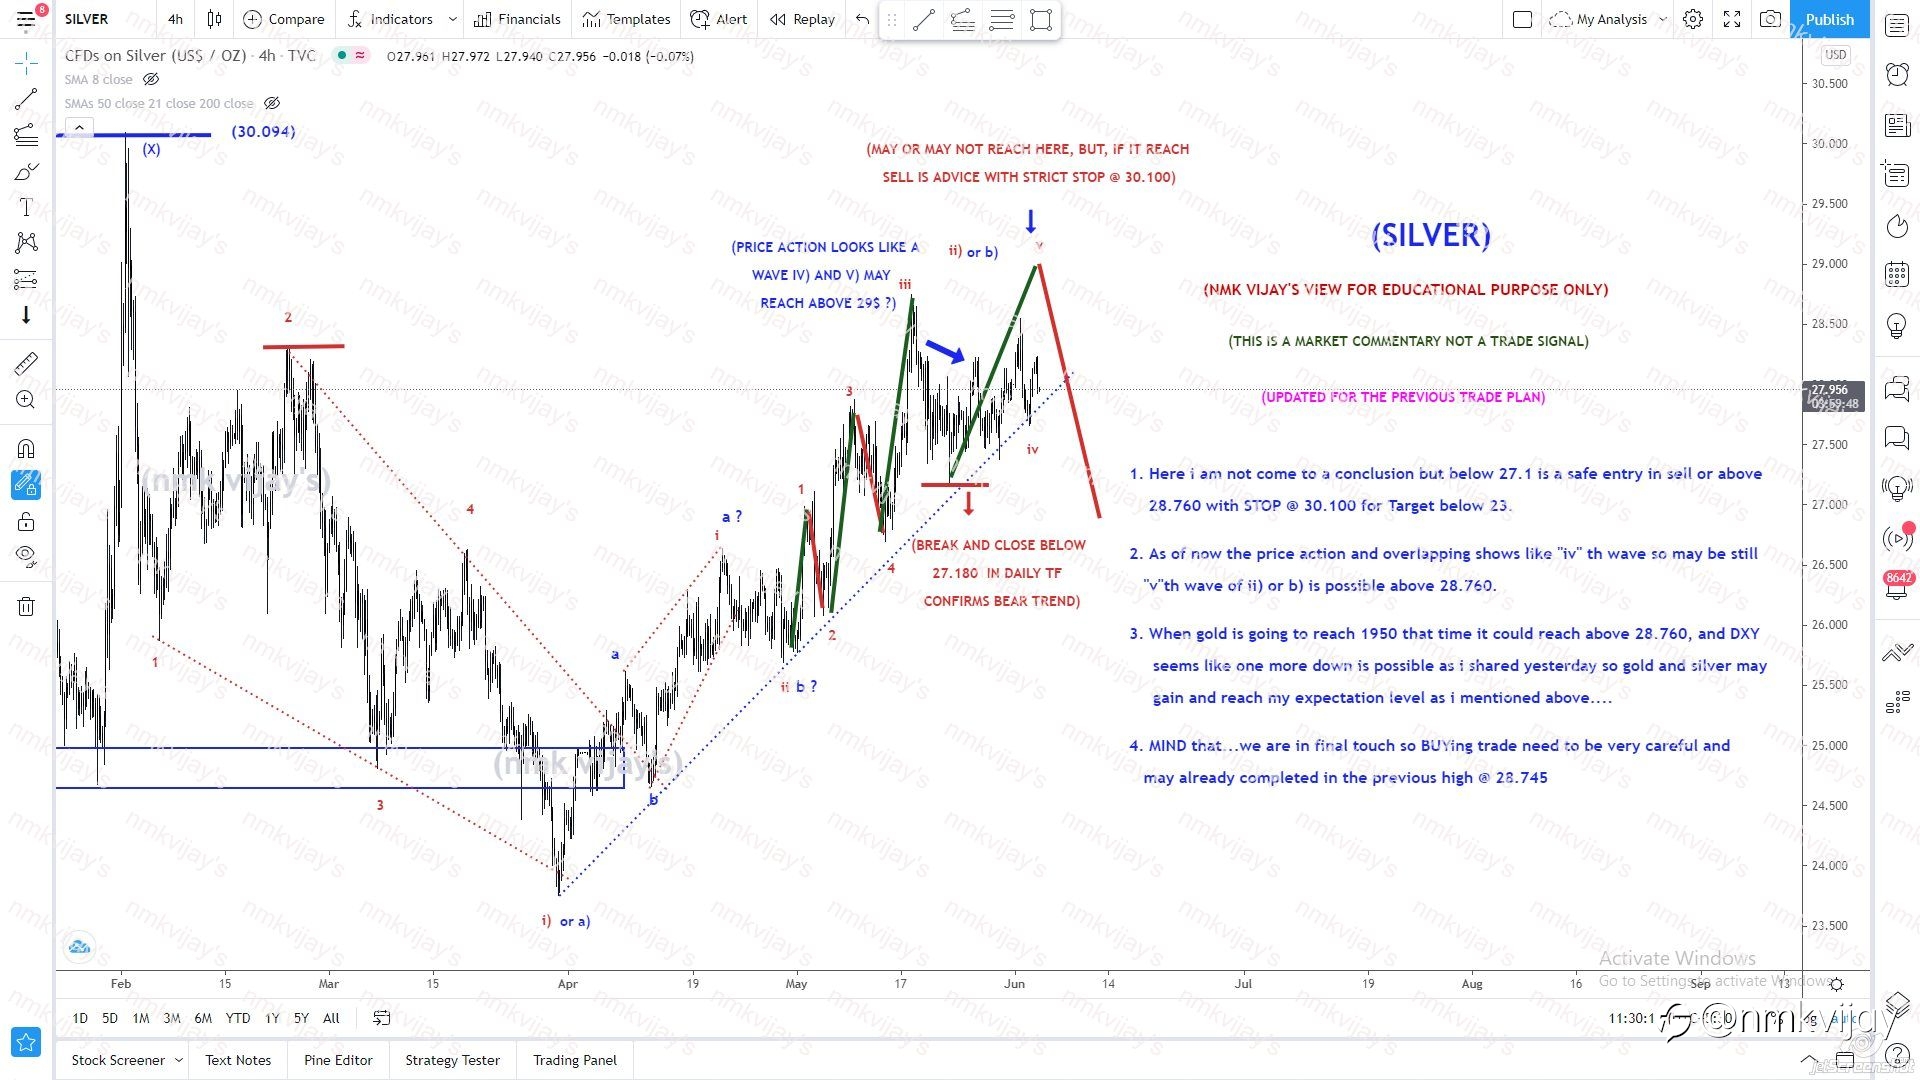 SILVER-Already completed or one more high above 28.750 ?